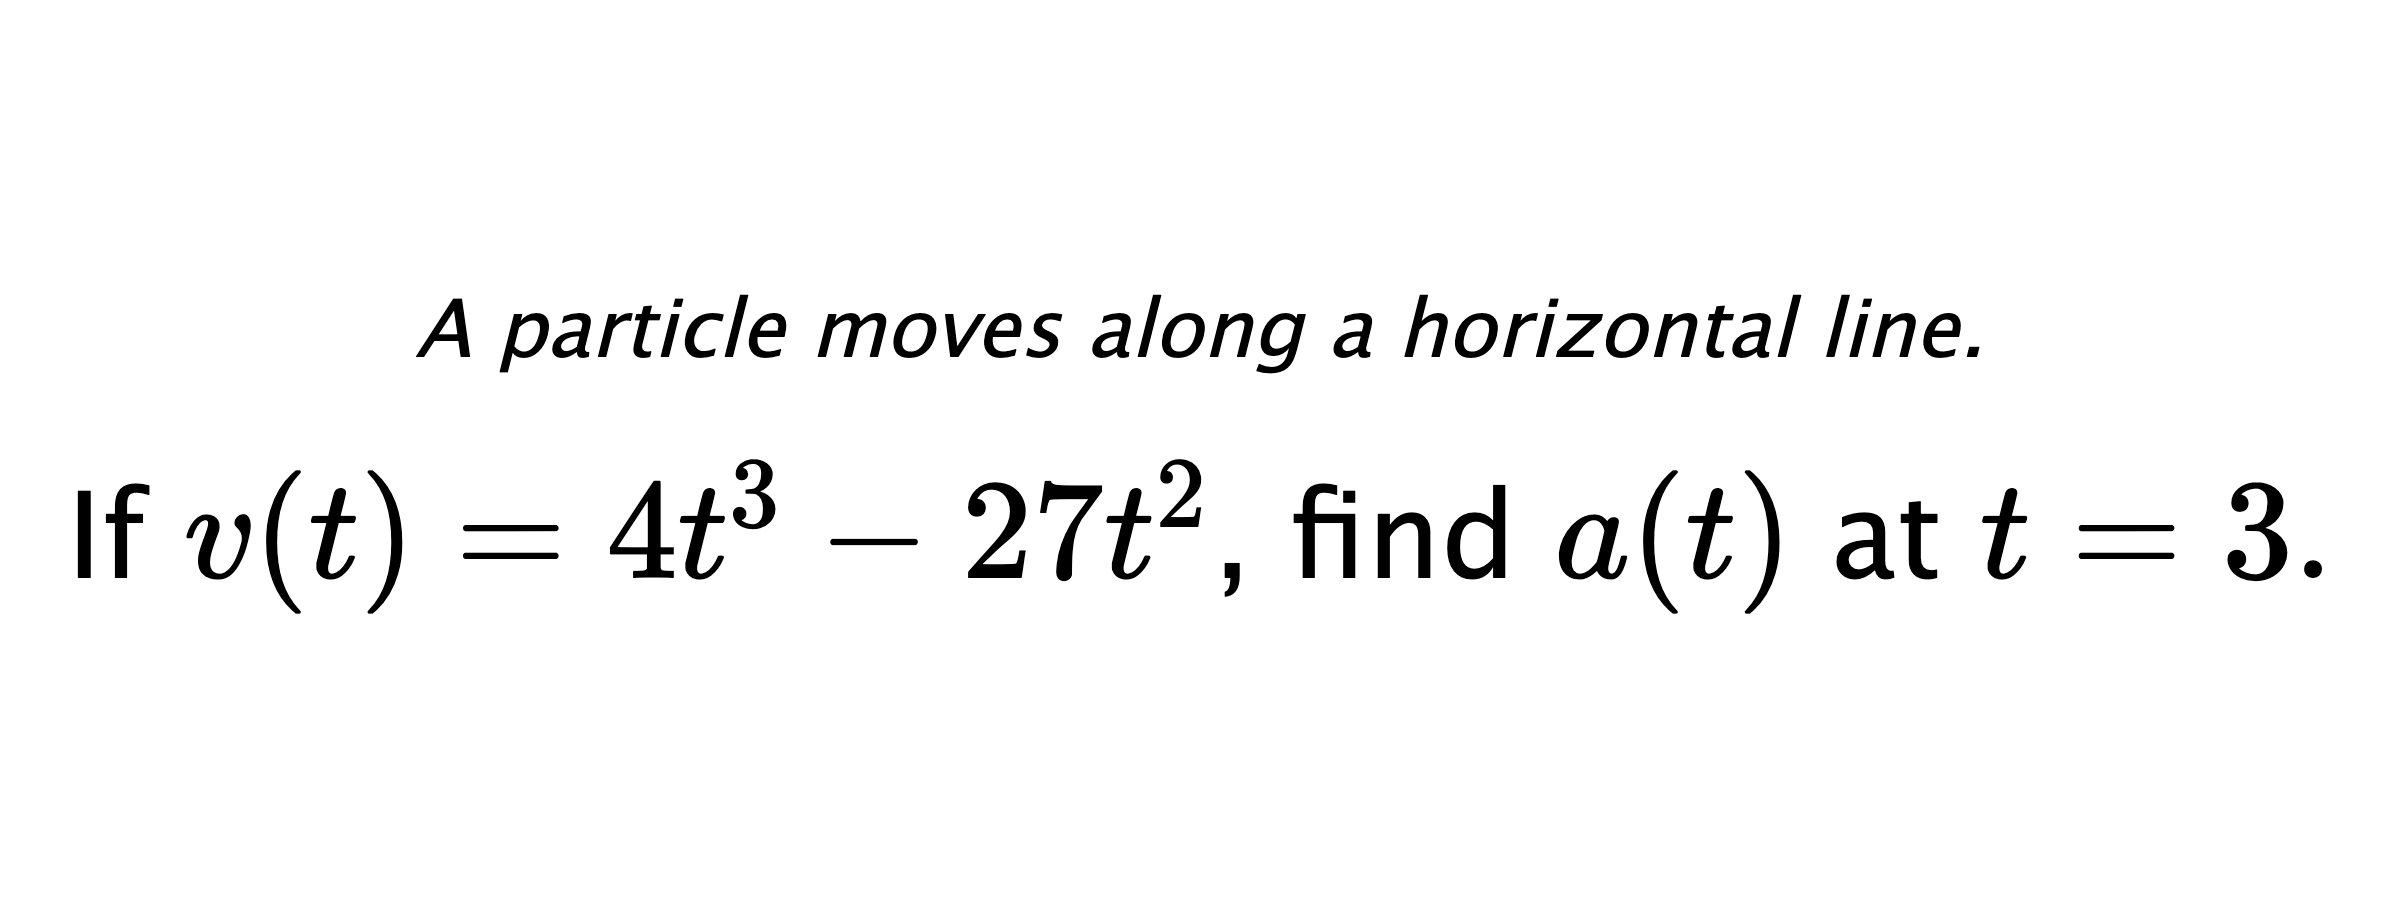 A particle moves along a horizontal line. If $ v(t)=4t^3-27t^2 $, find $ a(t) $ at $ t=3 .$